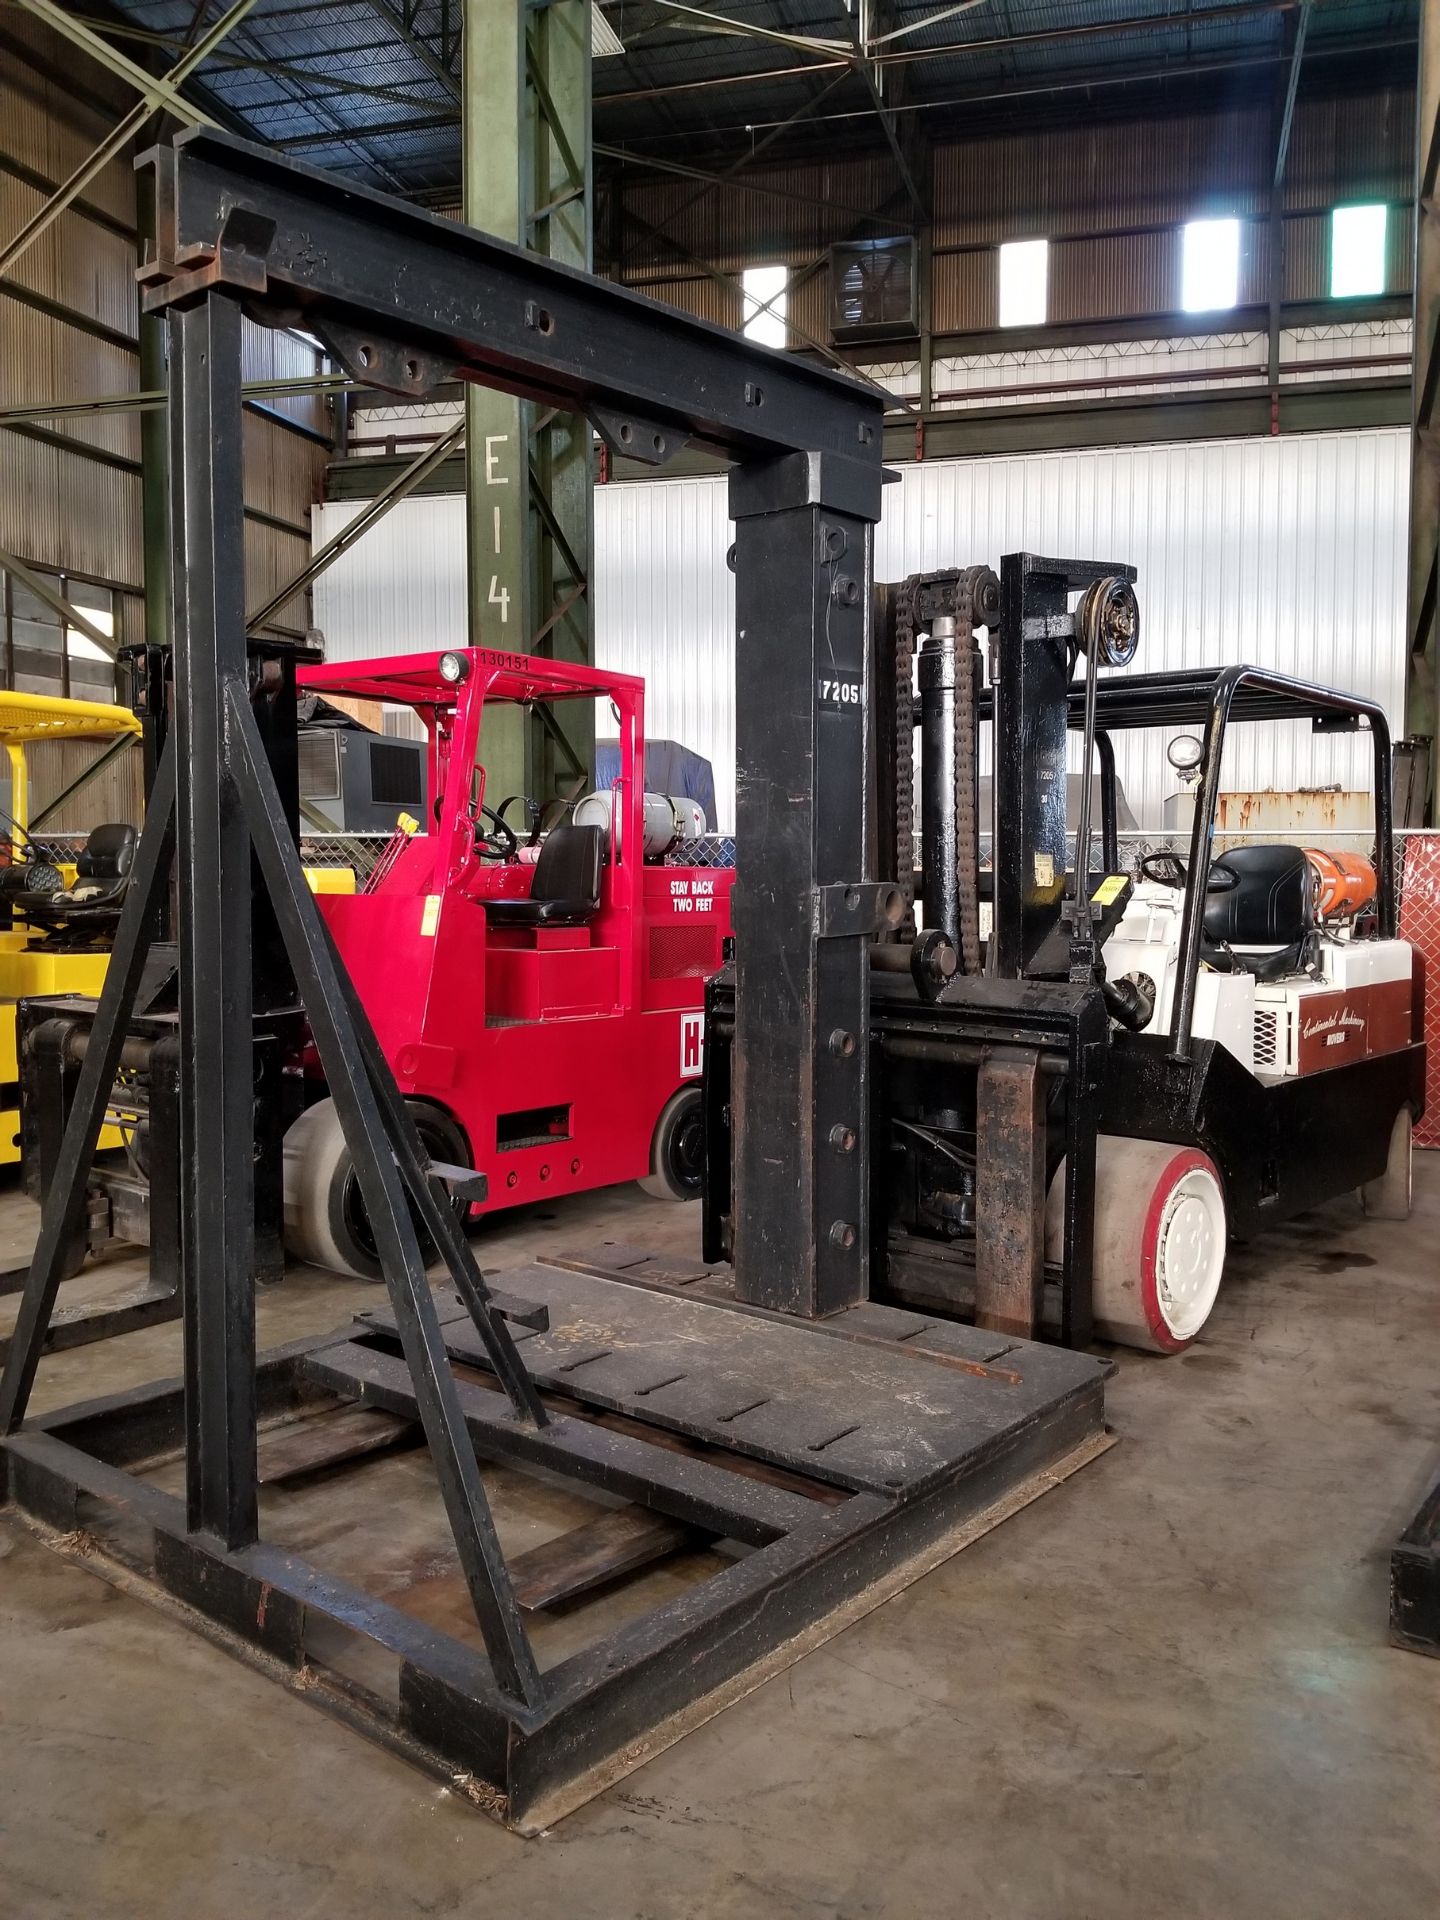 CATERPILLAR T300 30,000 LB. FORKLIFT; 2-STAGE MAST, 107'' LIFT HEIGHT, LP GAS, SOLID TIRES, 6,149 - Image 2 of 5